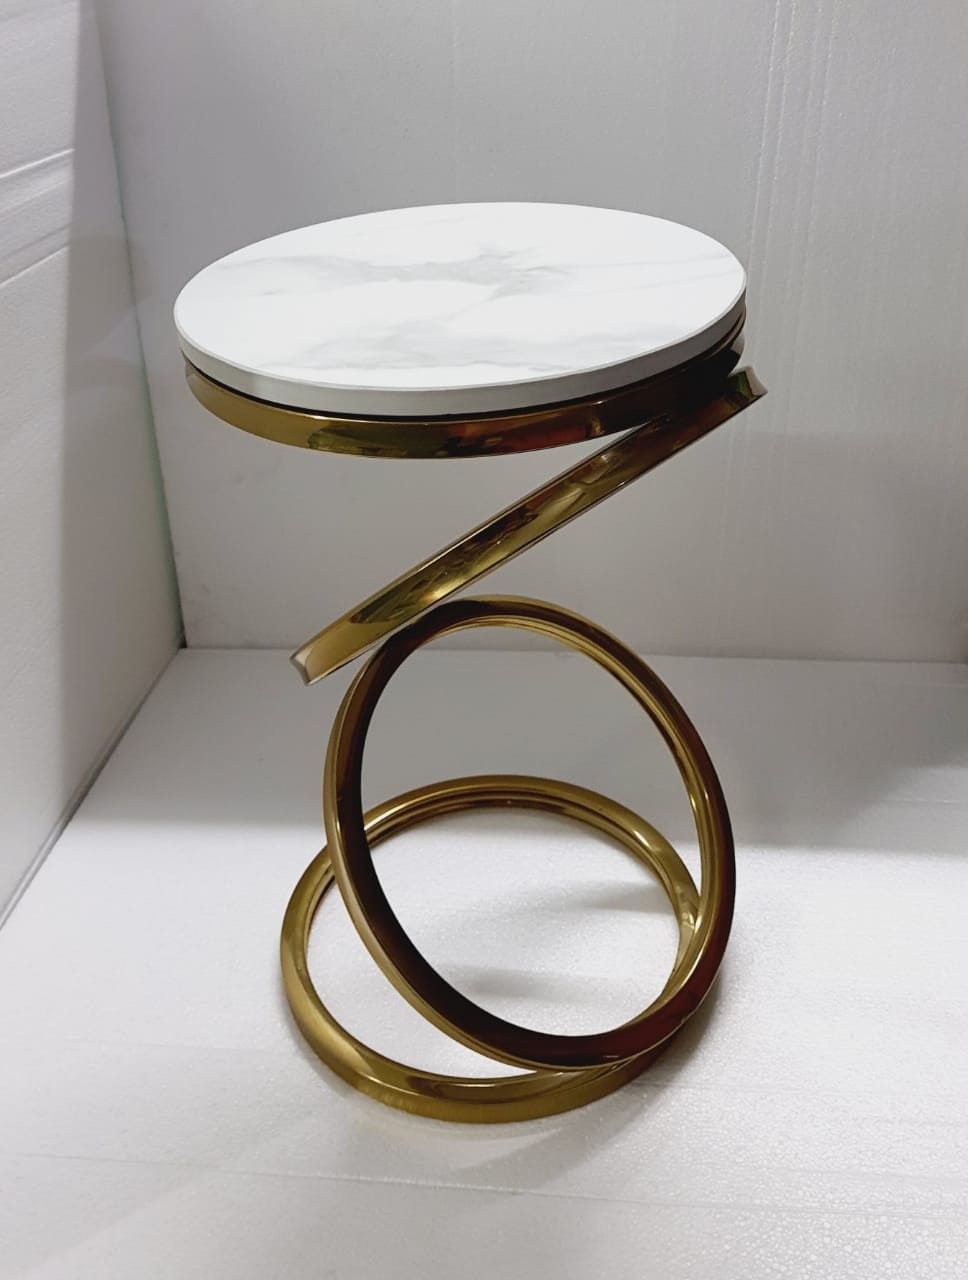 PC Home Decor | Stainless Steel Rings Side Table with Marble Top, Gold and White